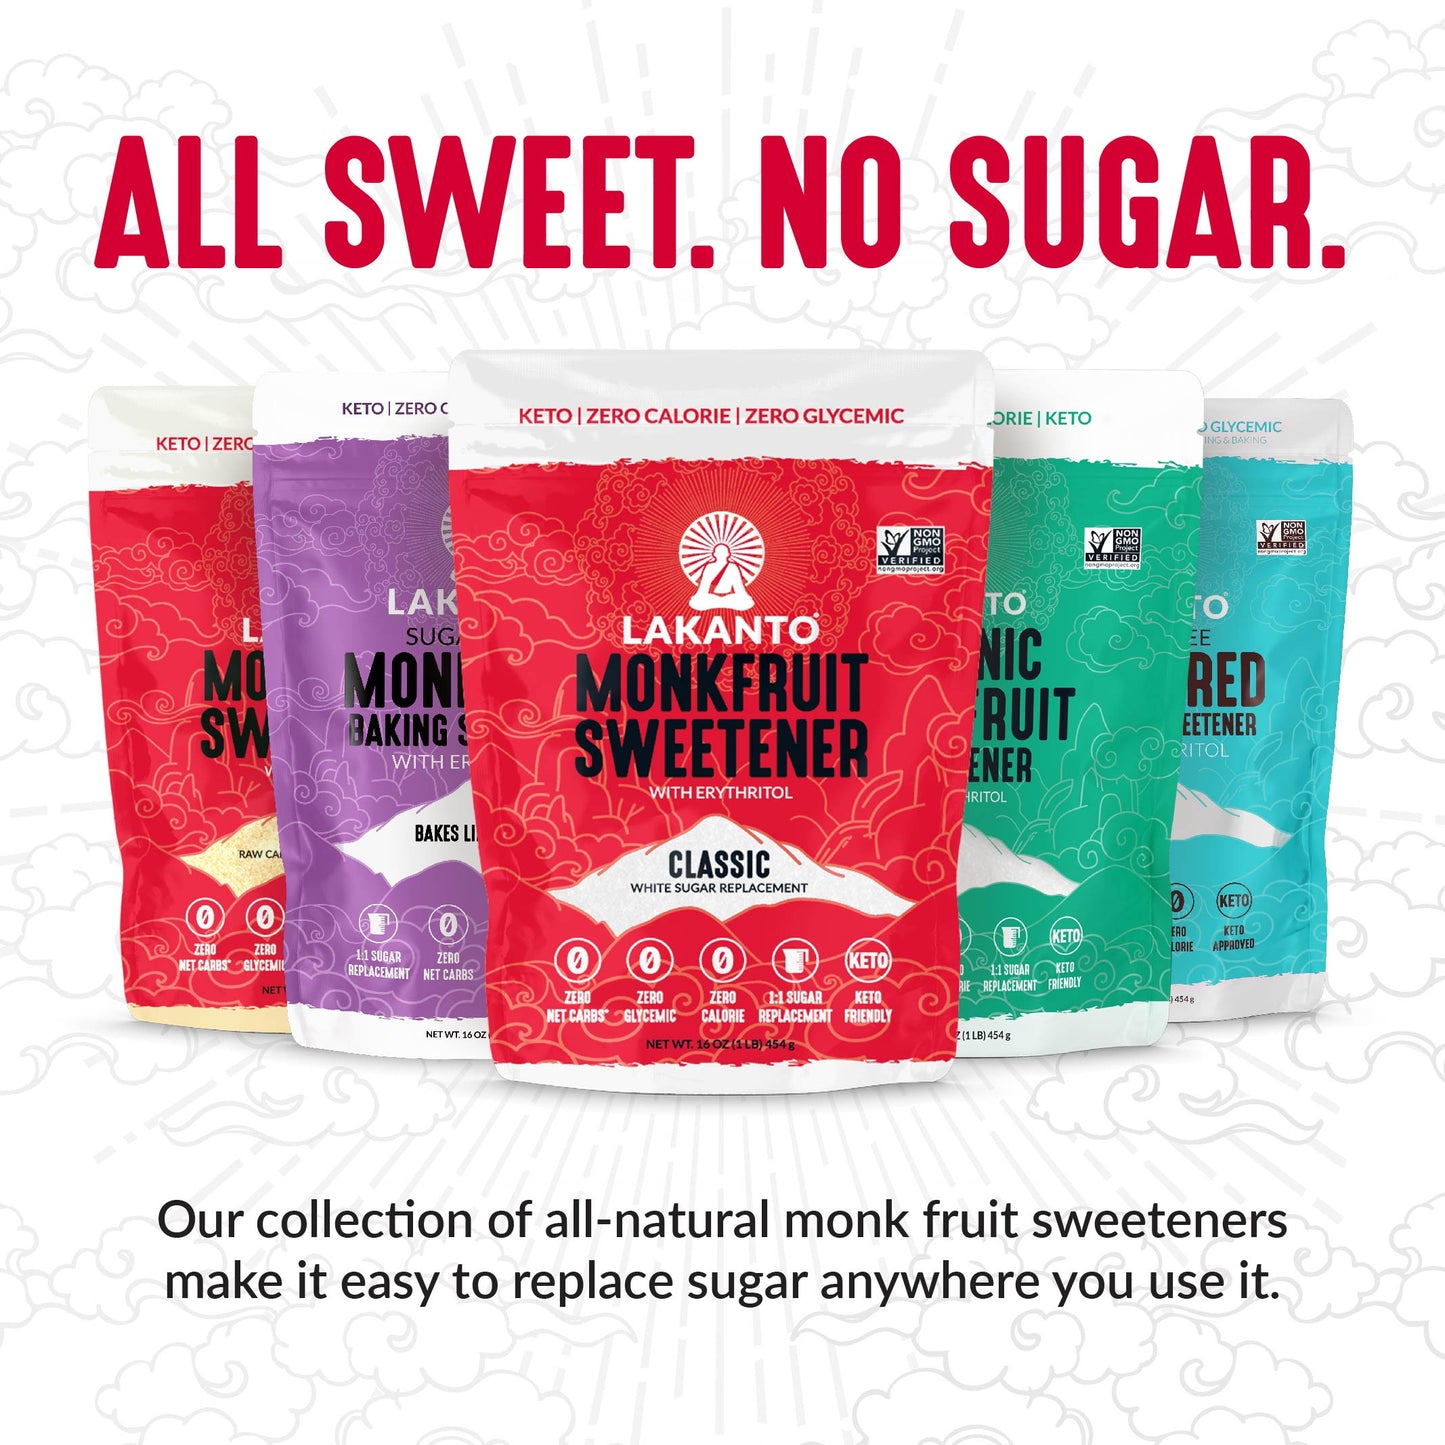 Classic Monk Fruit 2:1 Sweetener Packets - White Sugar Replacement